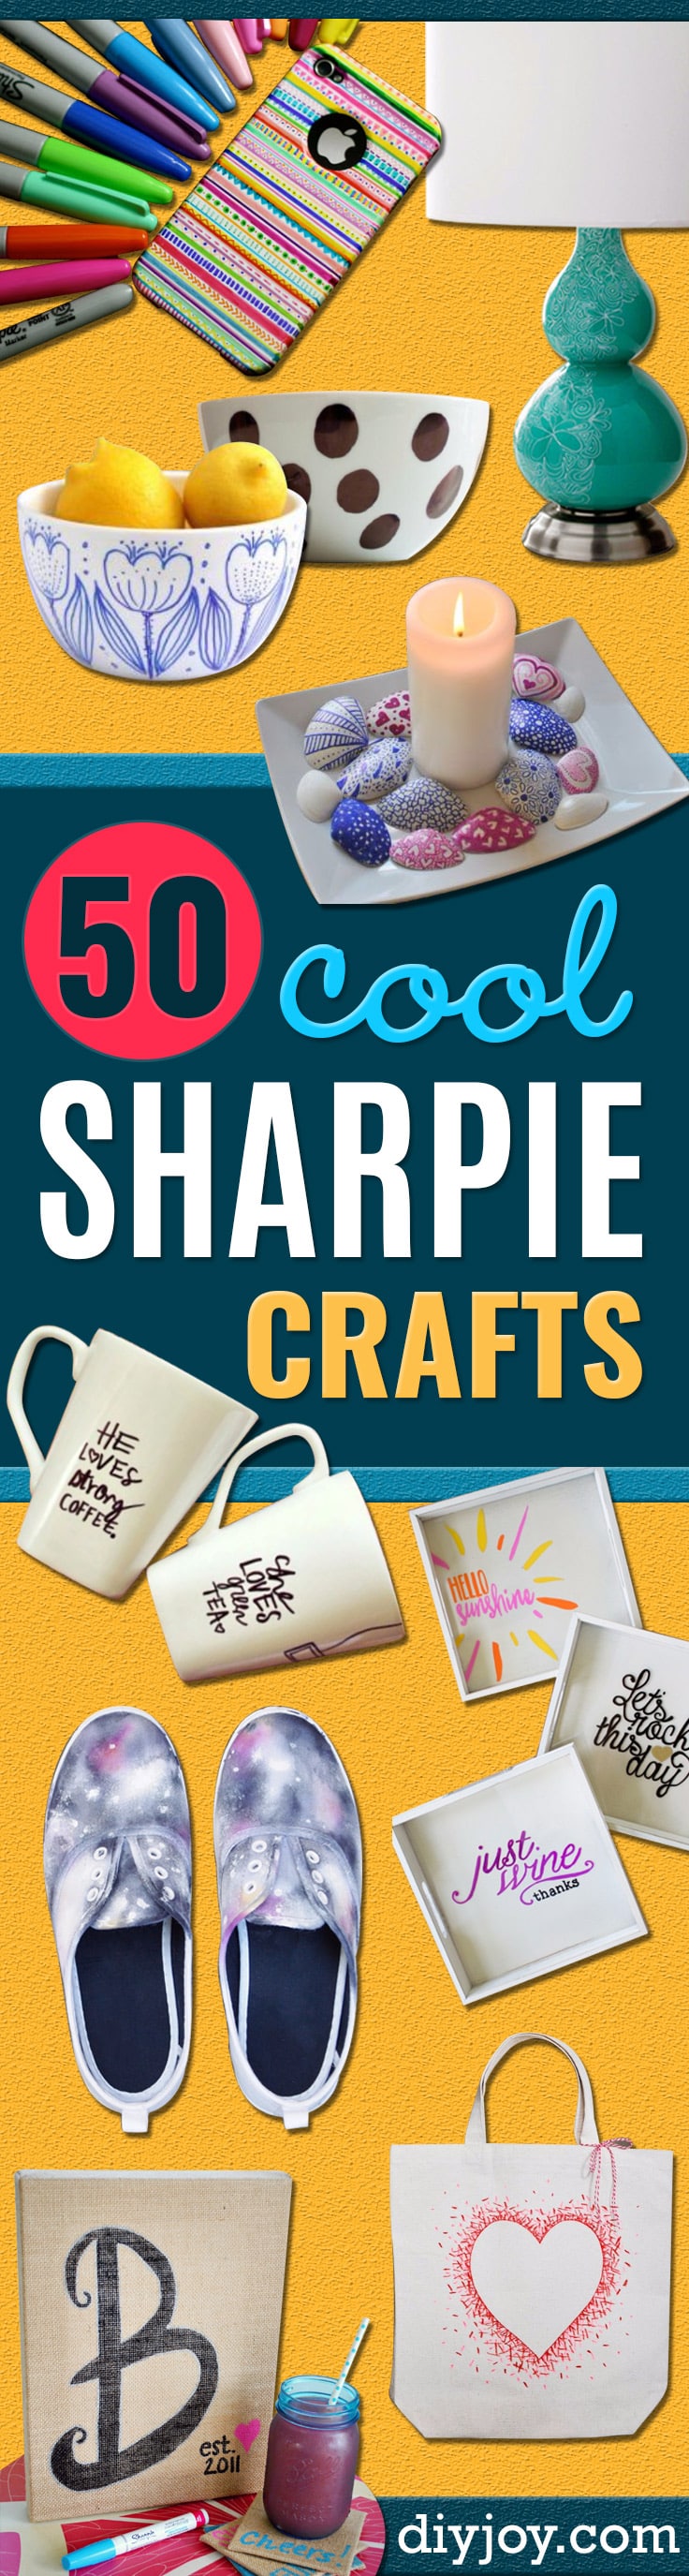 DIY Sharpie Crafts - Cool and Easy Craft Projects and DIY Ideas Using Sharpies - Use Markers To Decorate and Design Home Decor, Cool Homemade Gifts, T-Shirts, Shoes and Wall Art. Creative Project Tutorials for Teens, Kids and Adults 